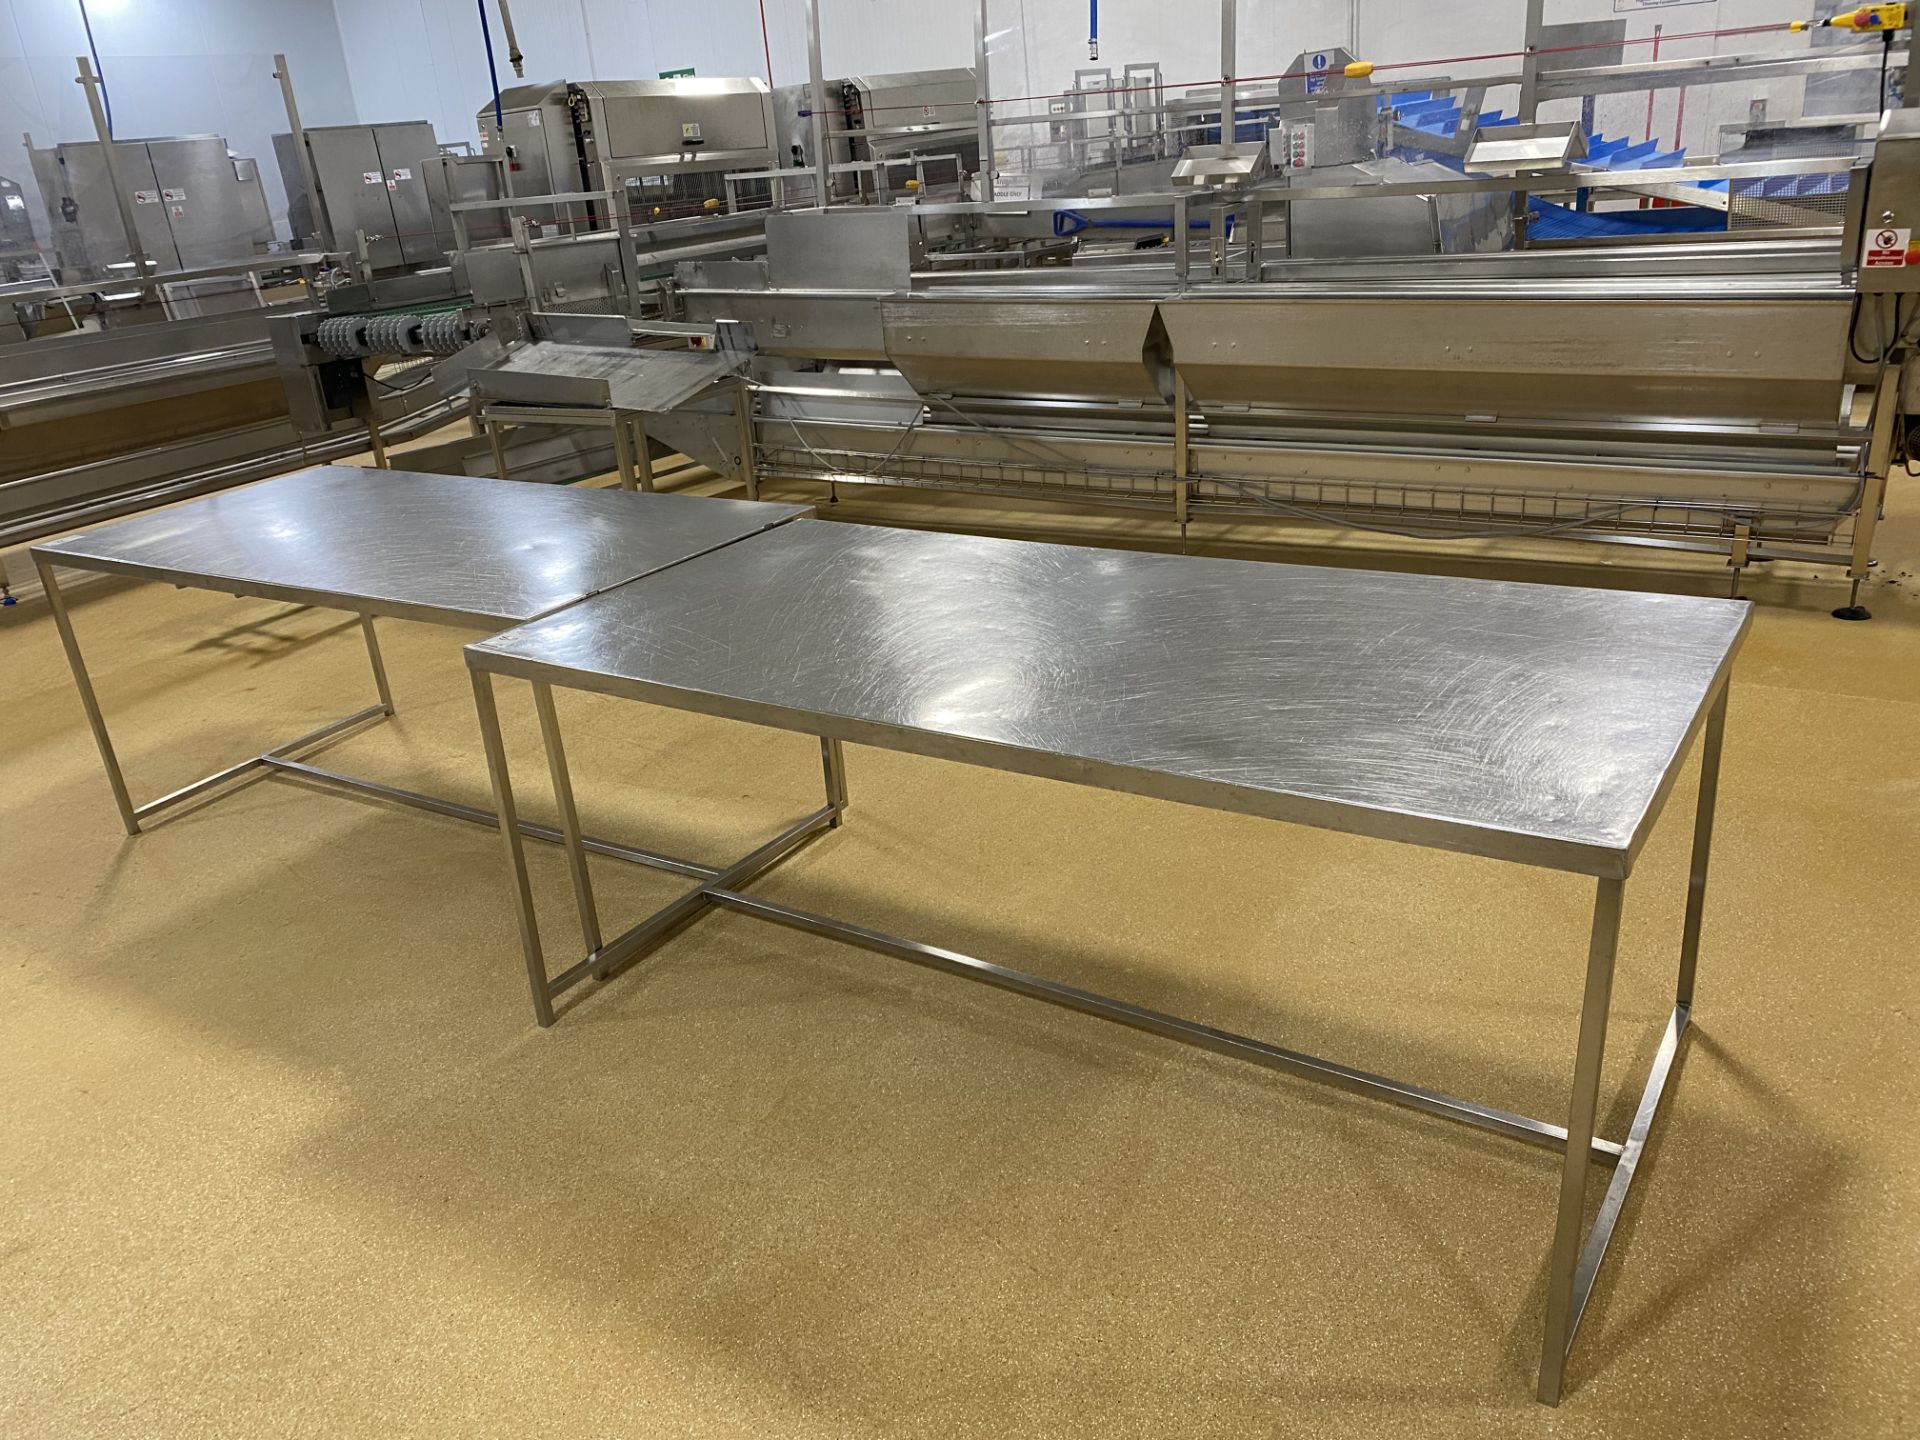 2 Stainless steel preparation tables, Length 193cm - Image 3 of 4